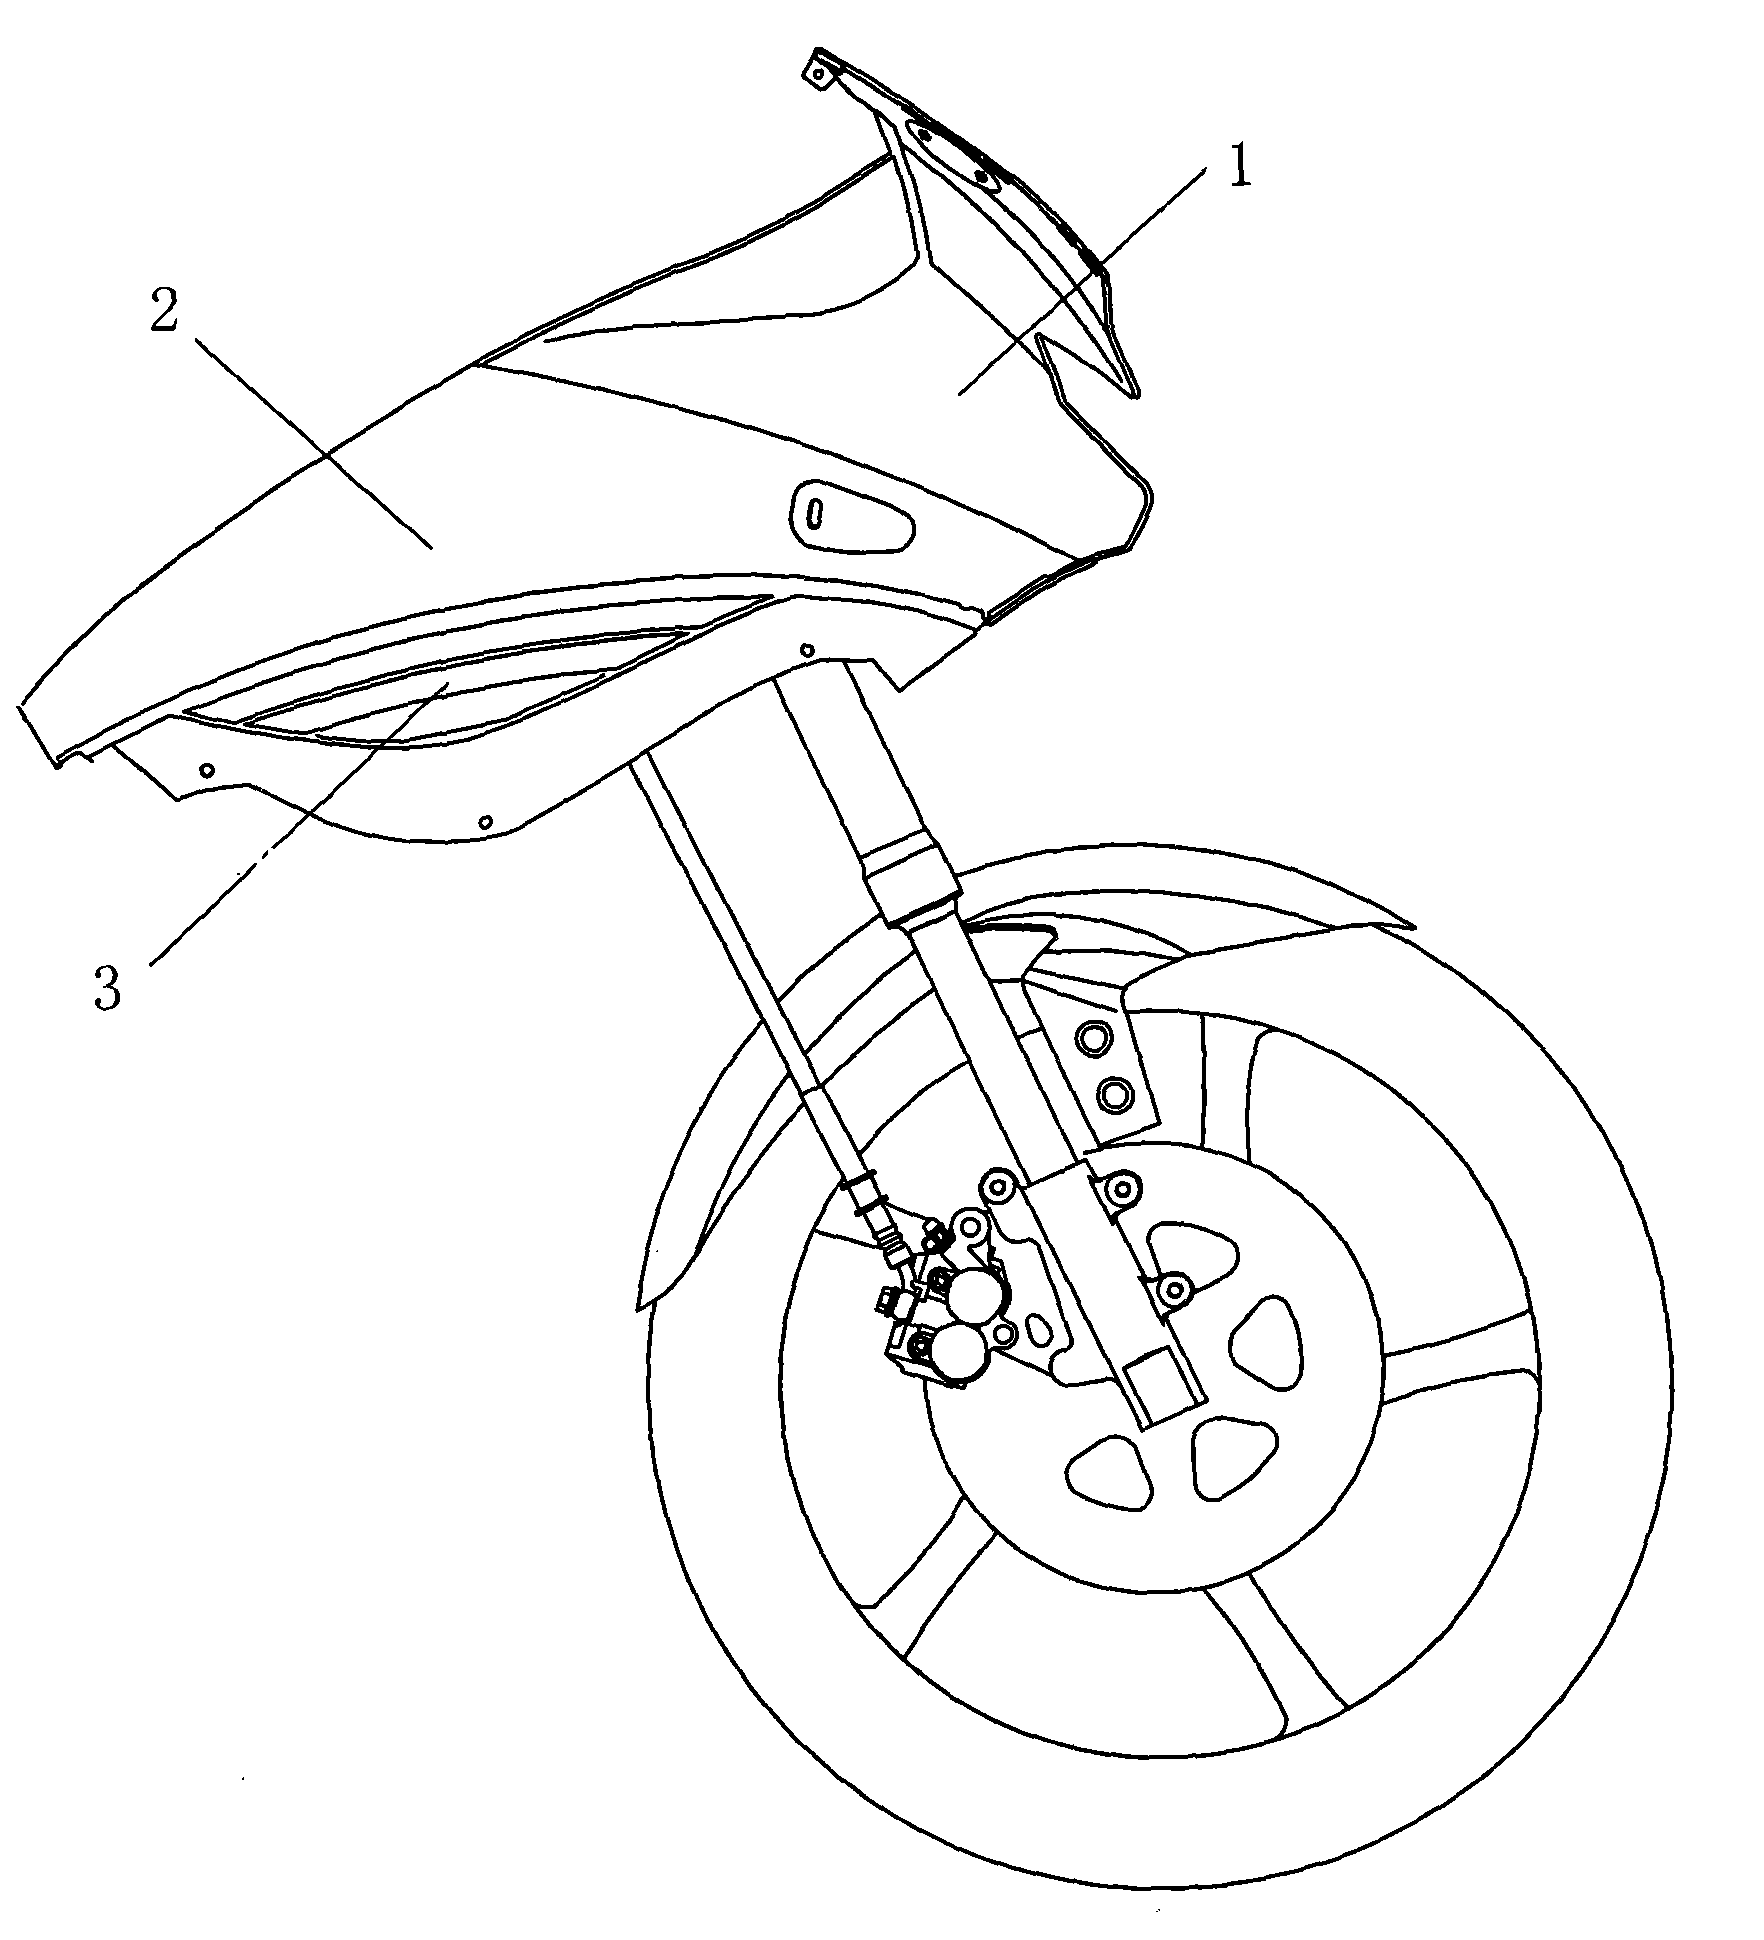 Connecting structure of motorcycle covering pieces and front body covering piece assembly